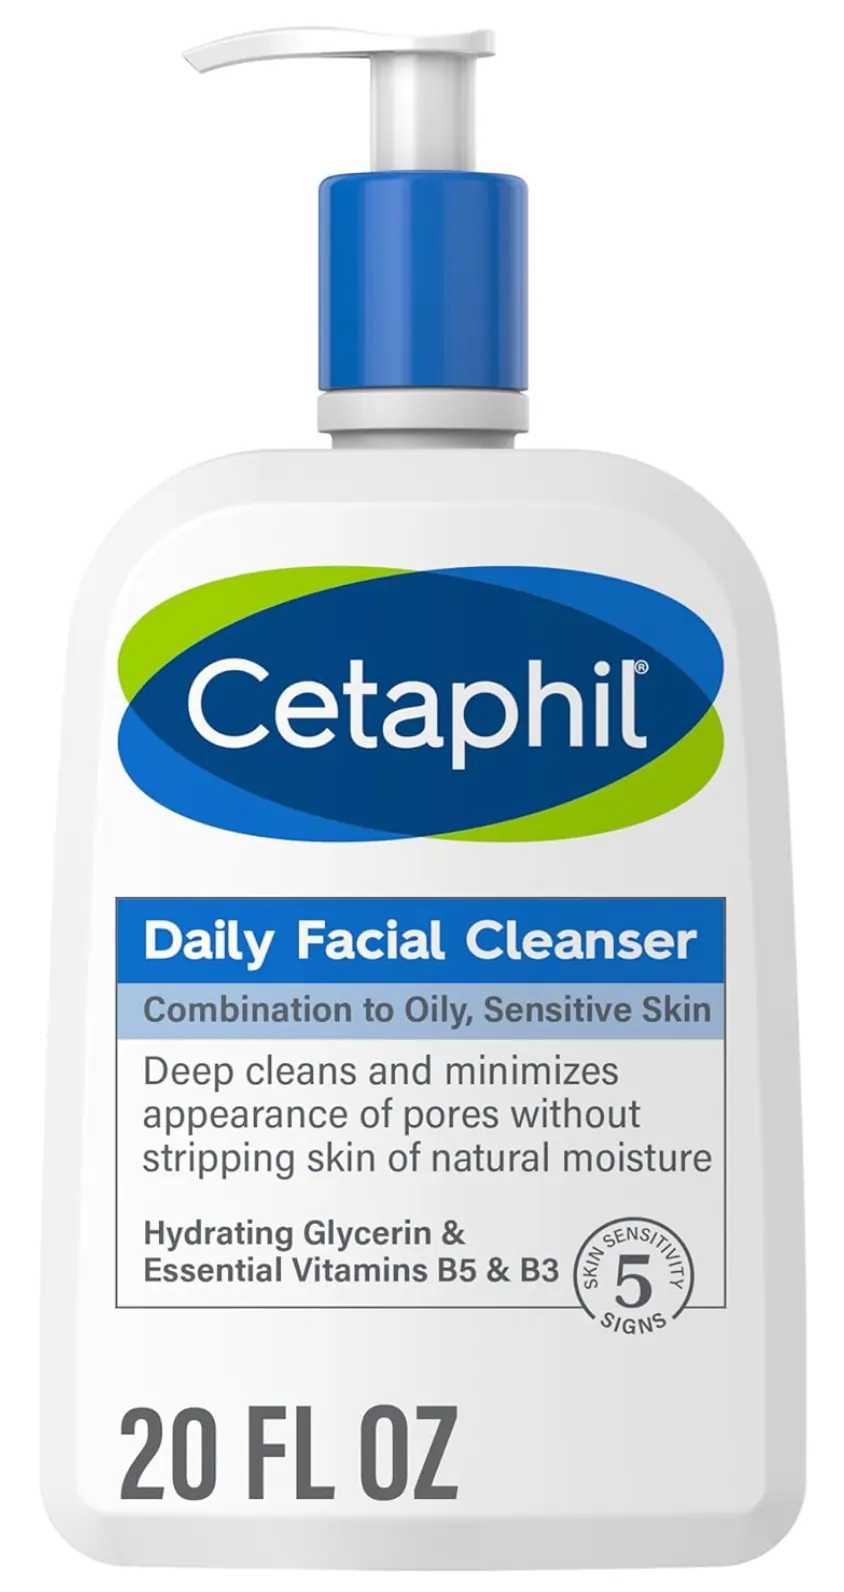 FEMMENORDIC's choice in the Cetaphil Daily Facial Cleanser vs Gentle Skin Cleanser comparison, the Cetaphil Daily Facial Cleanser